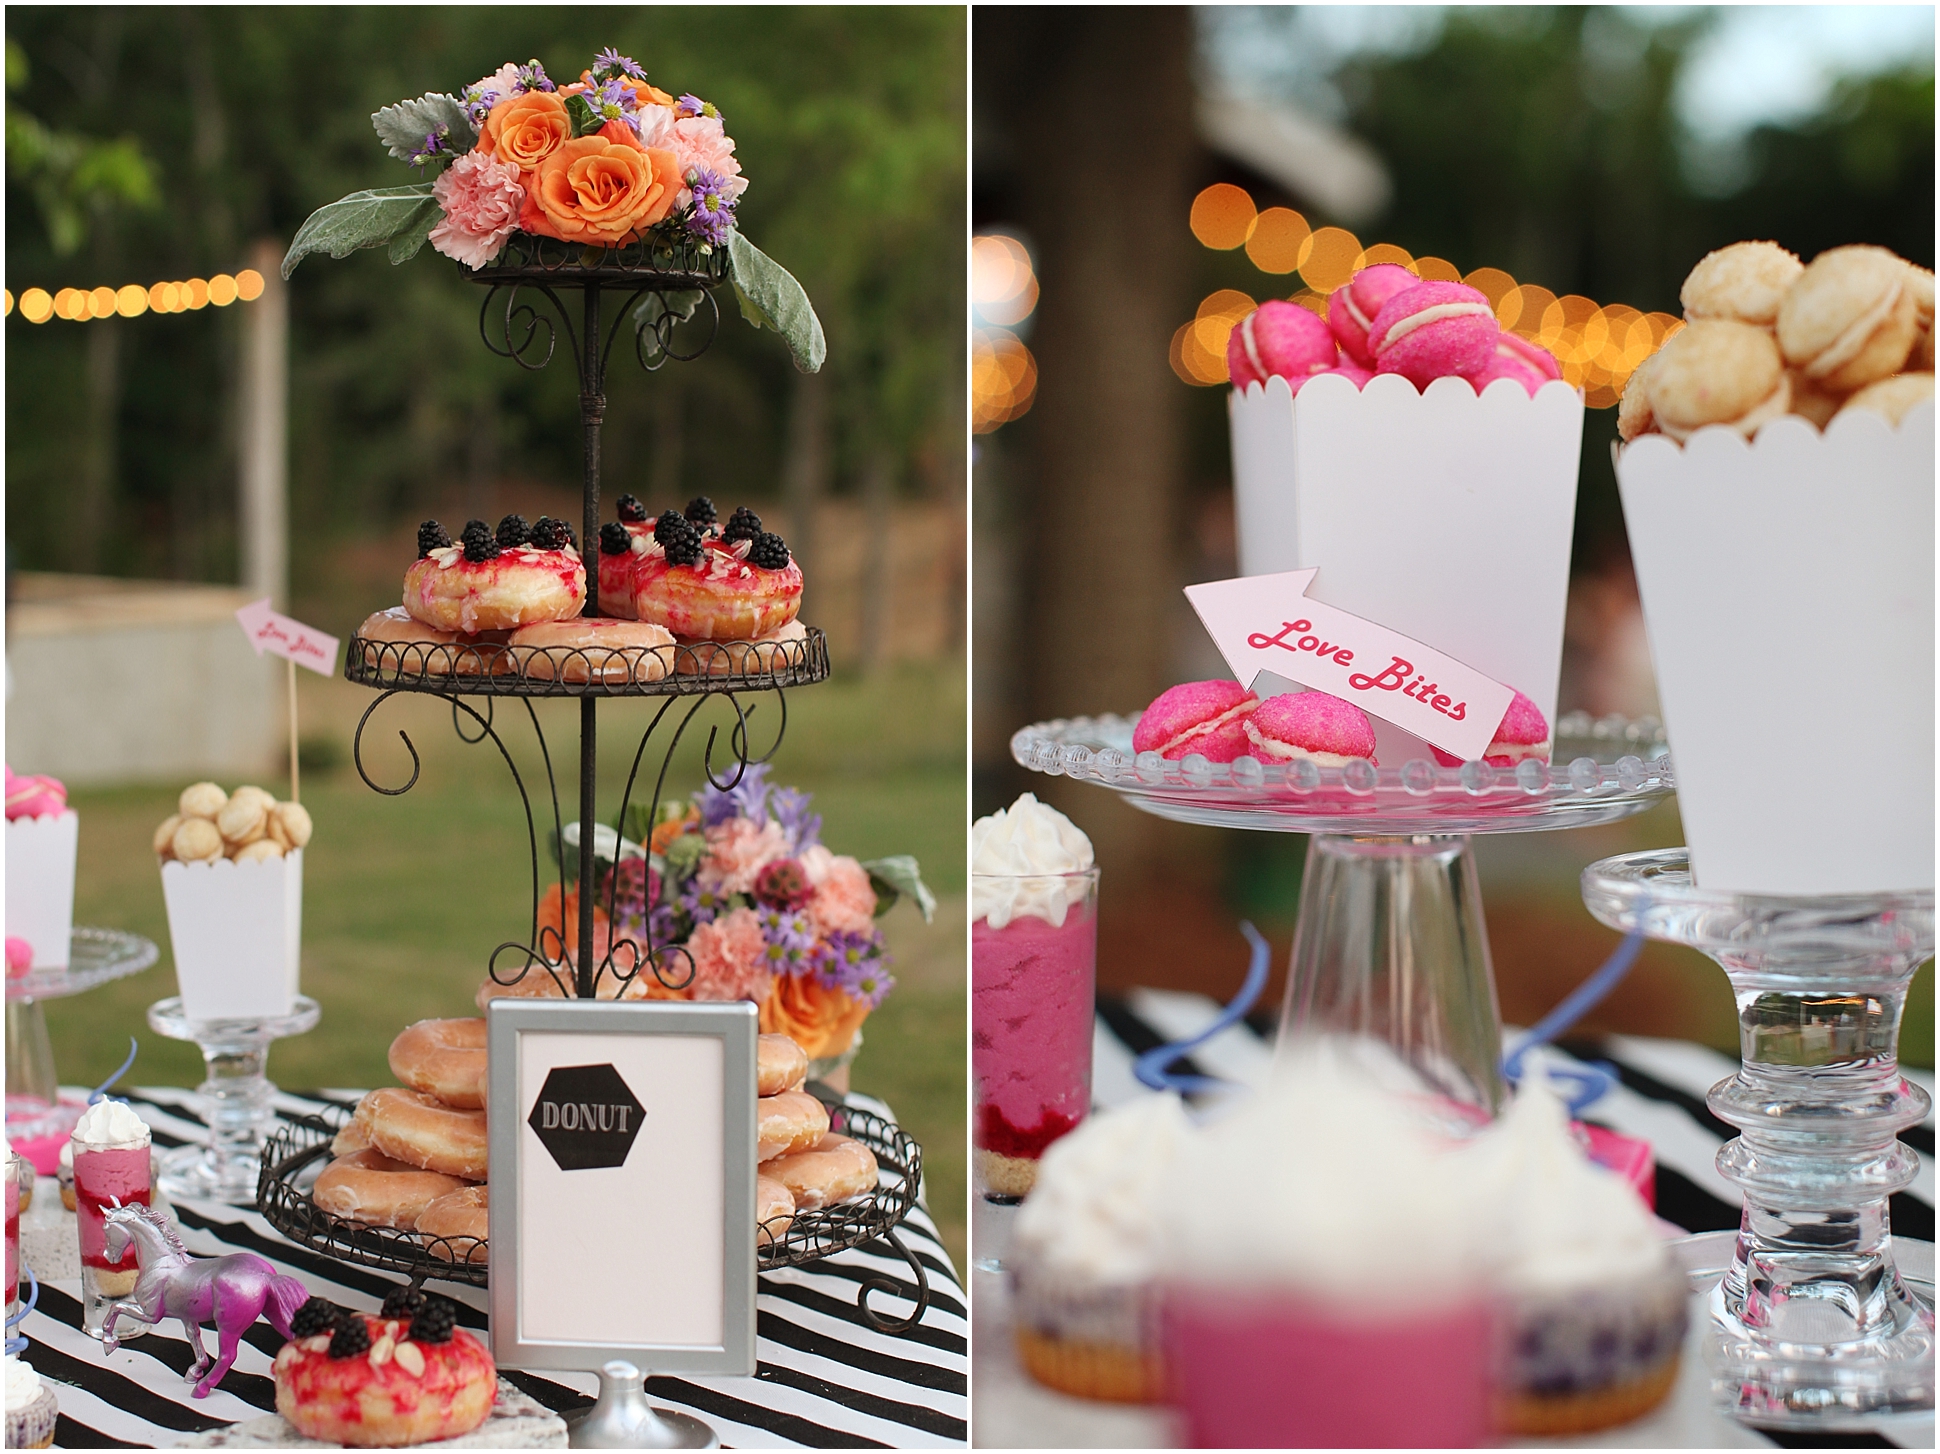 Kate Spade Inspired Bridesmaids Dessert and Cocktail Party | Two Chics Photography | www.twochicsphotography.com